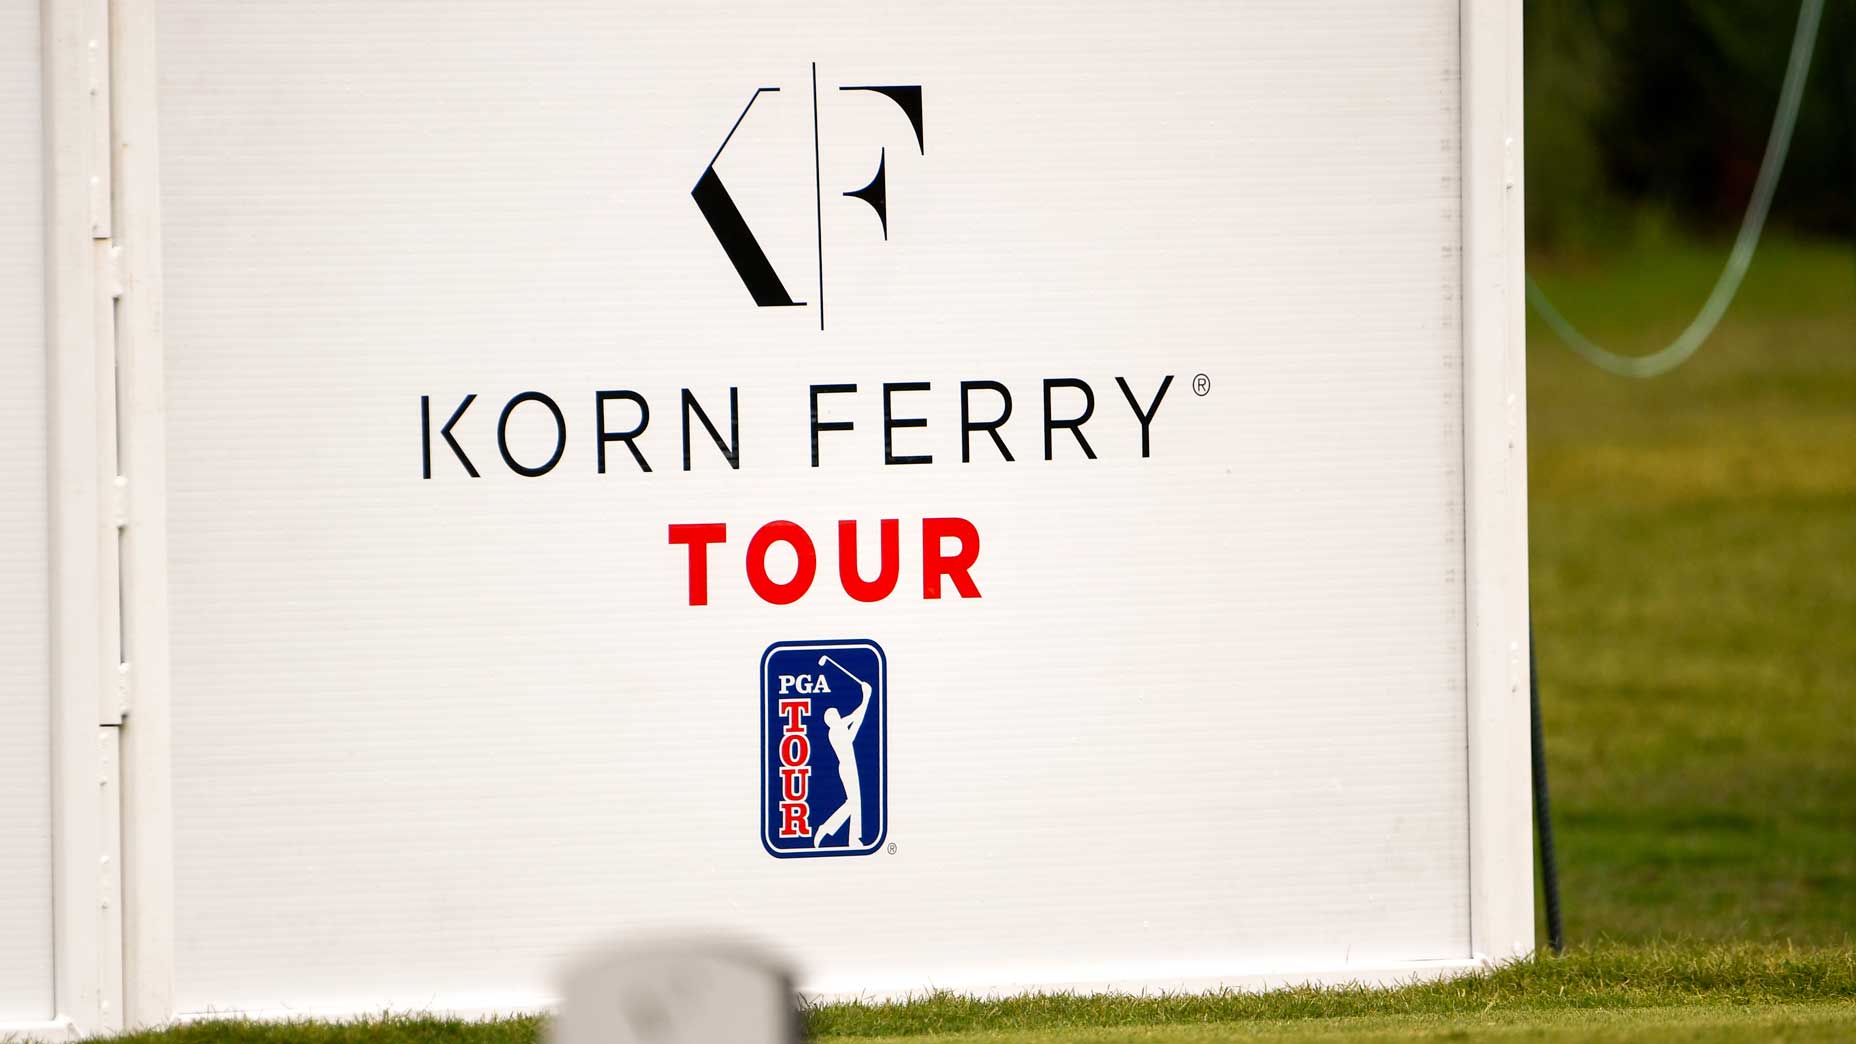 Korn Ferry Tour schedule See all 26 events slated for the 2022 season